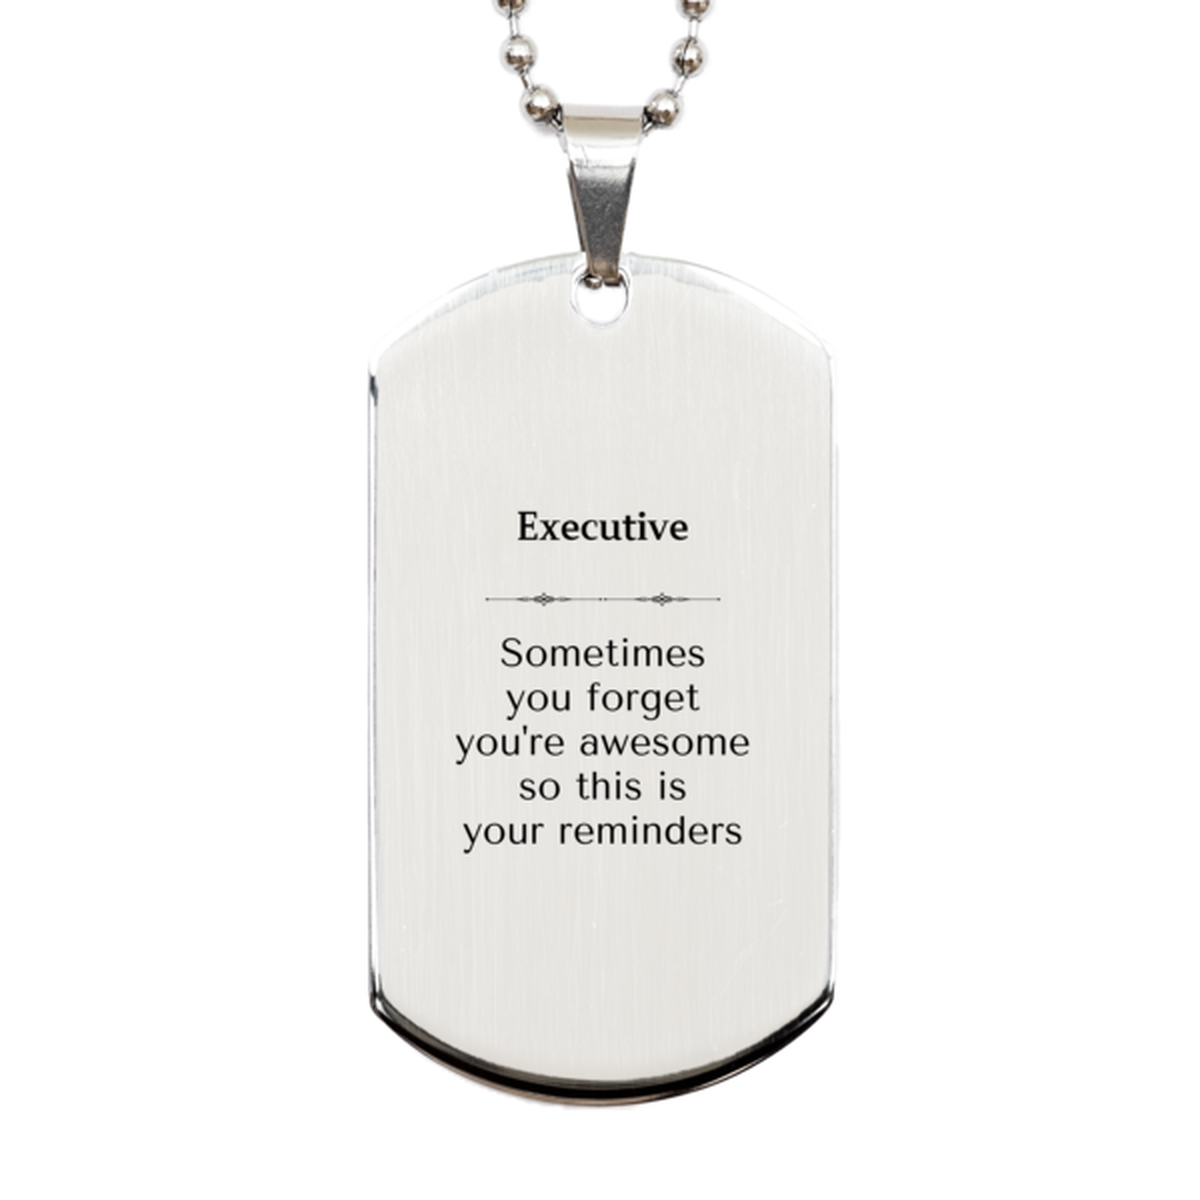 Sentimental Executive Silver Dog Tag, Executive Sometimes you forget you're awesome so this is your reminders, Graduation Christmas Birthday Gifts for Executive, Men, Women, Coworkers